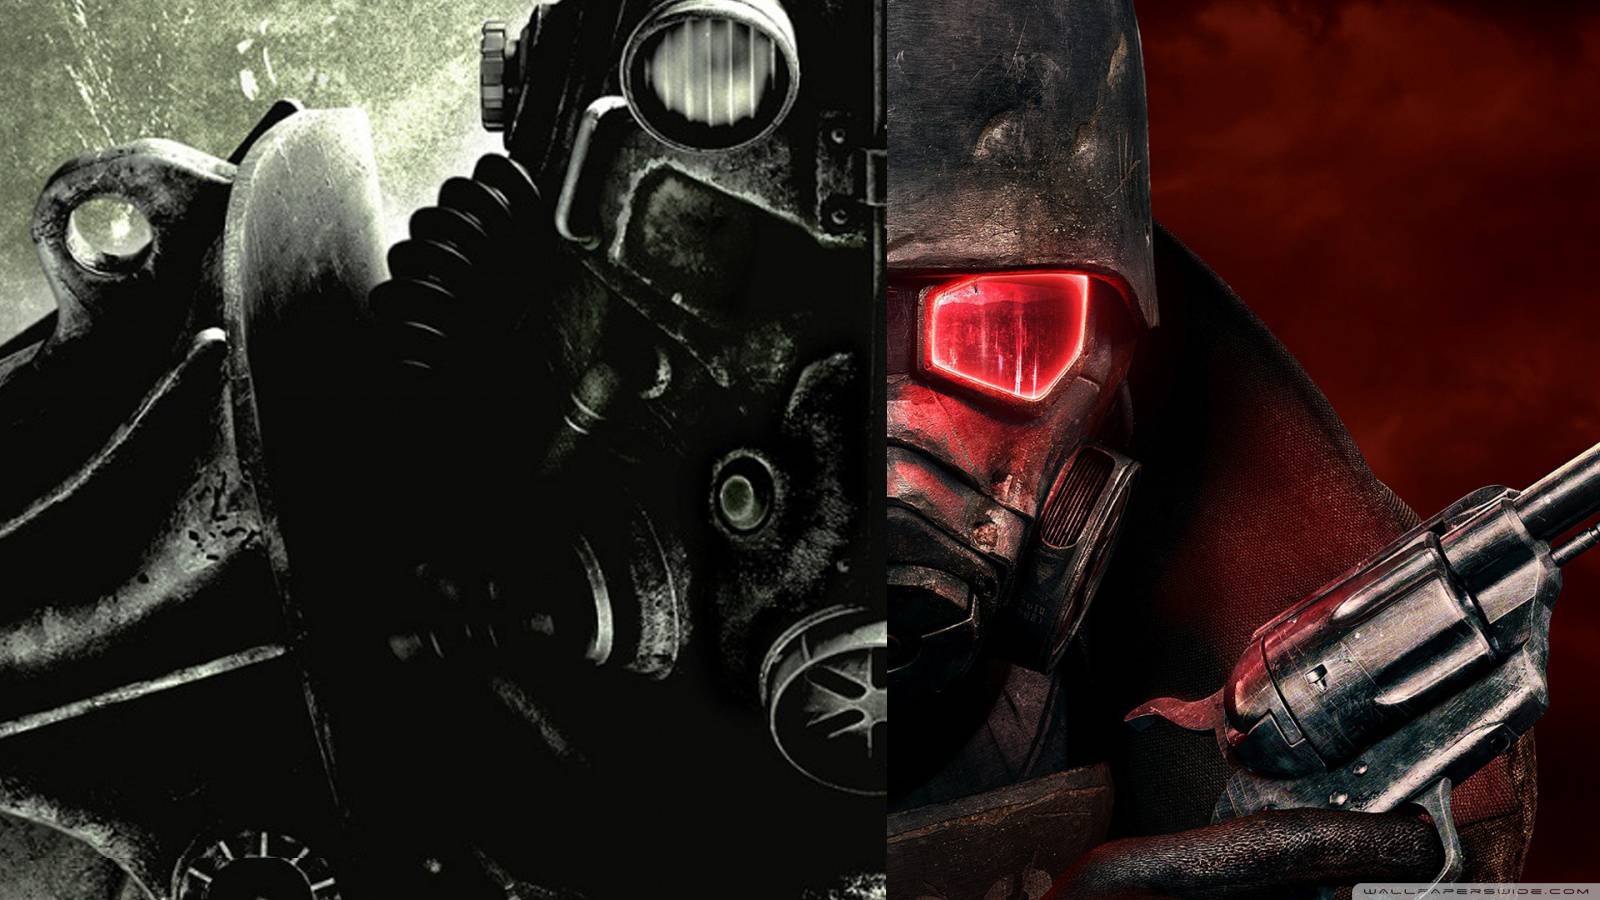 Fallout 3 or New Vegas - which game is better?